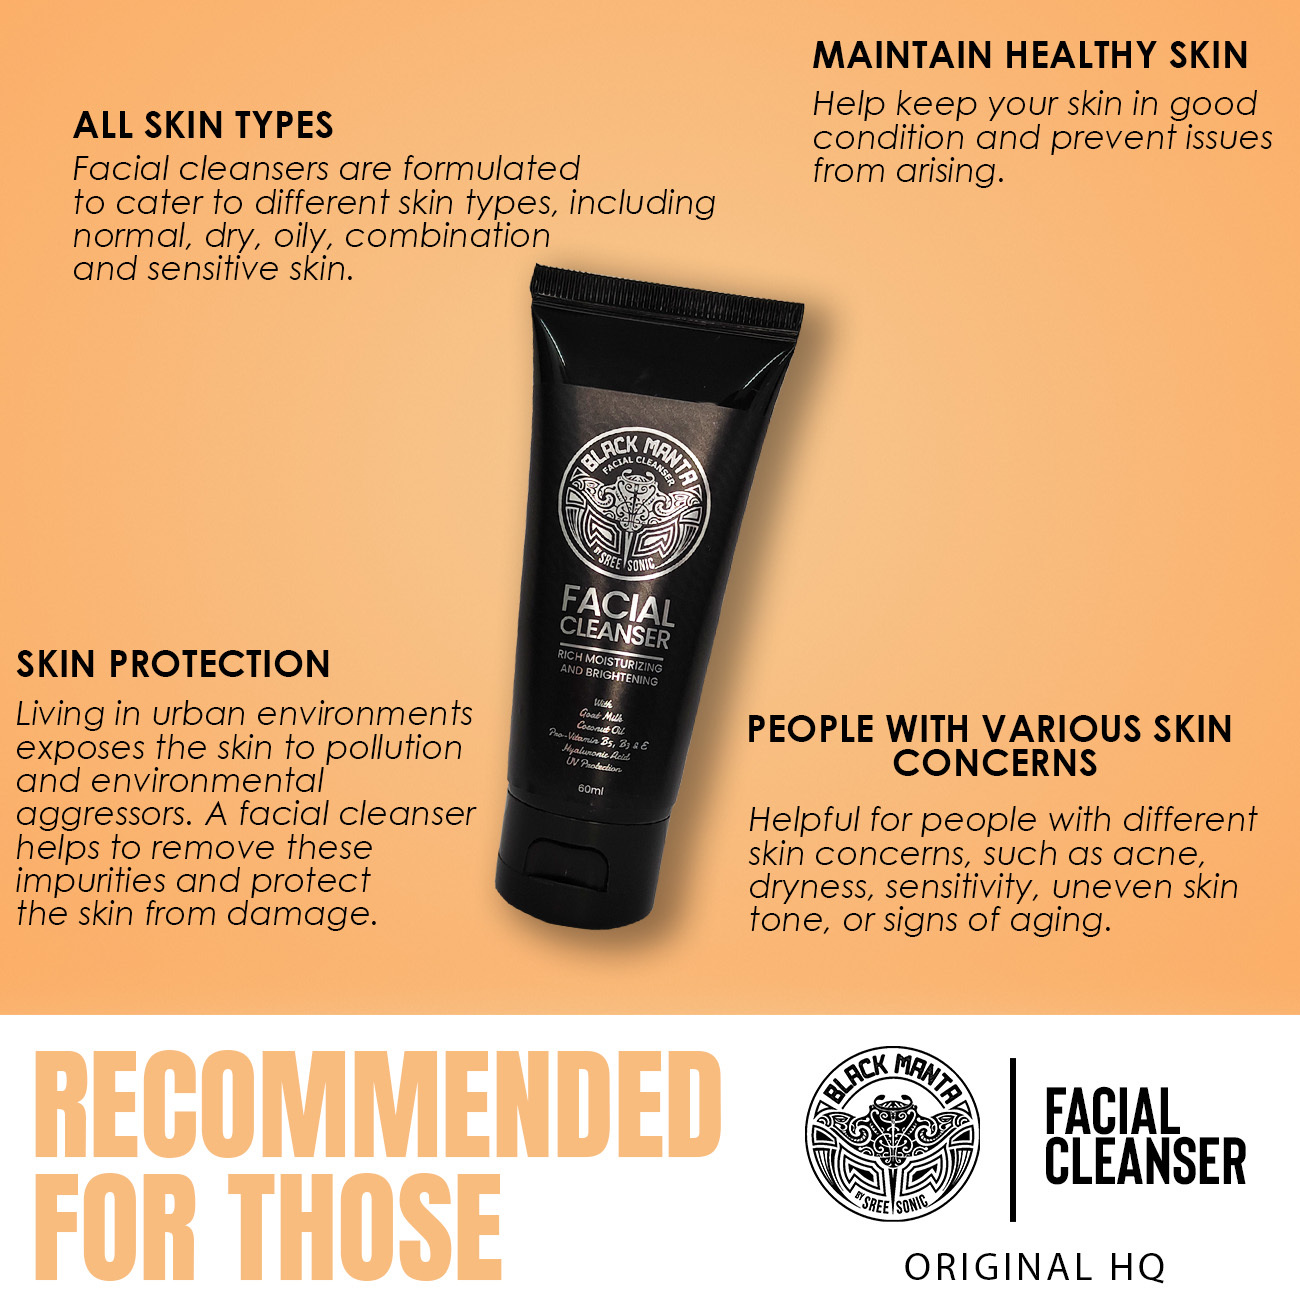 CLEANSER - RECOMMENDED FOR THOSE